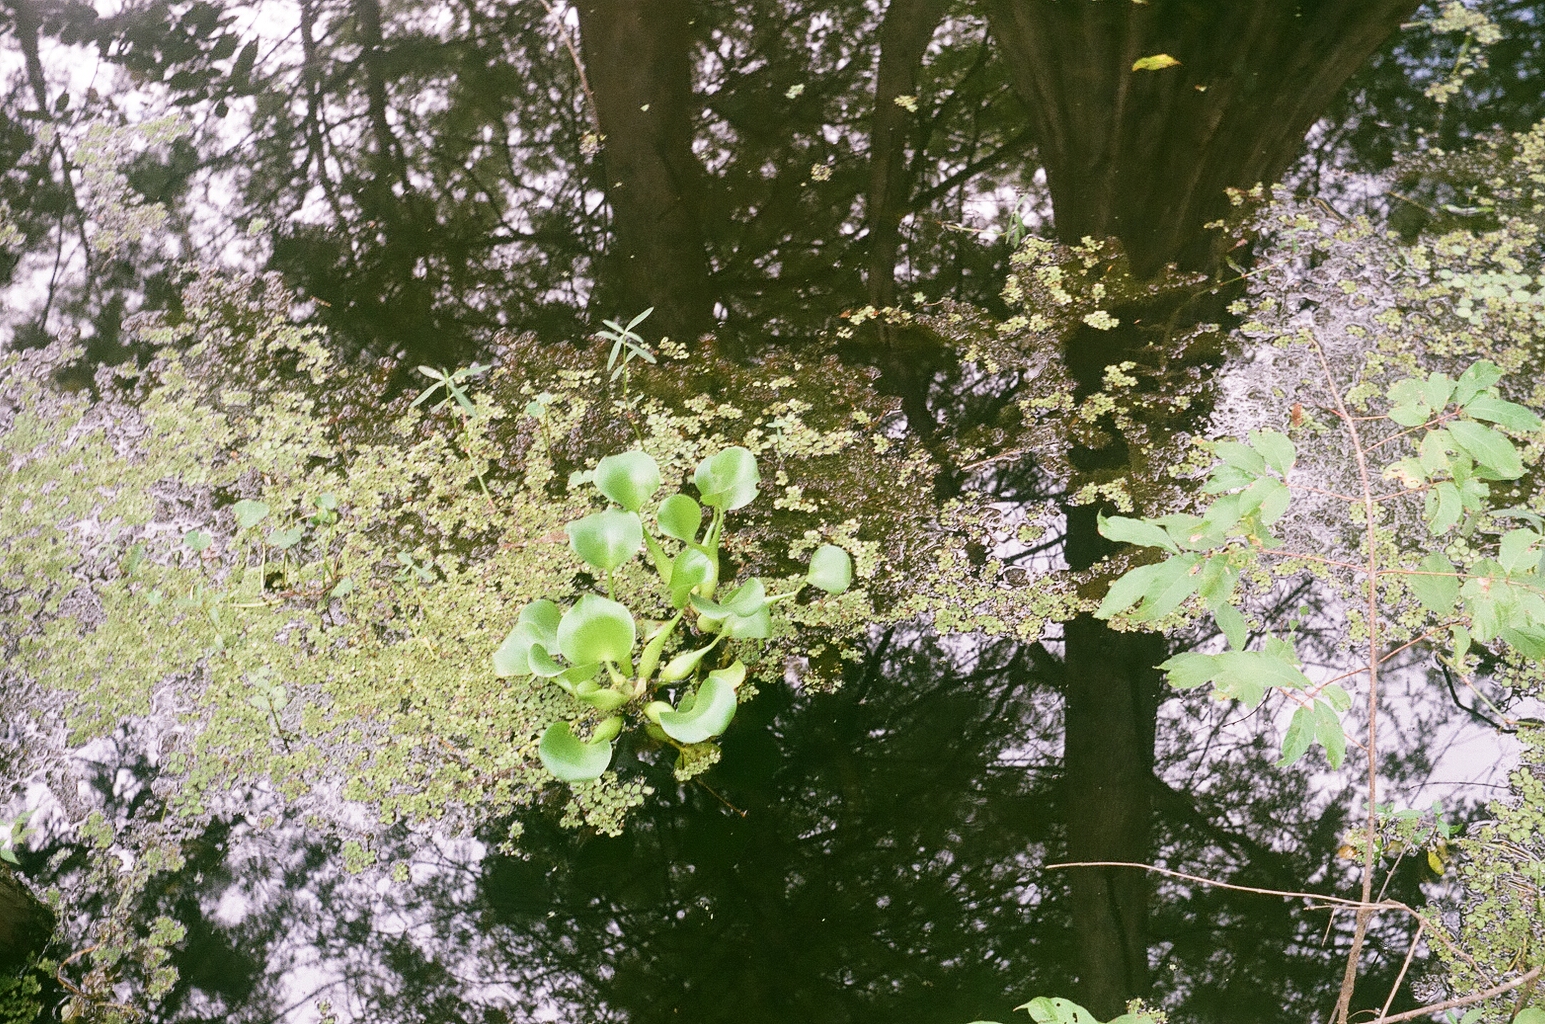 Reflections of cypress, plants in the water